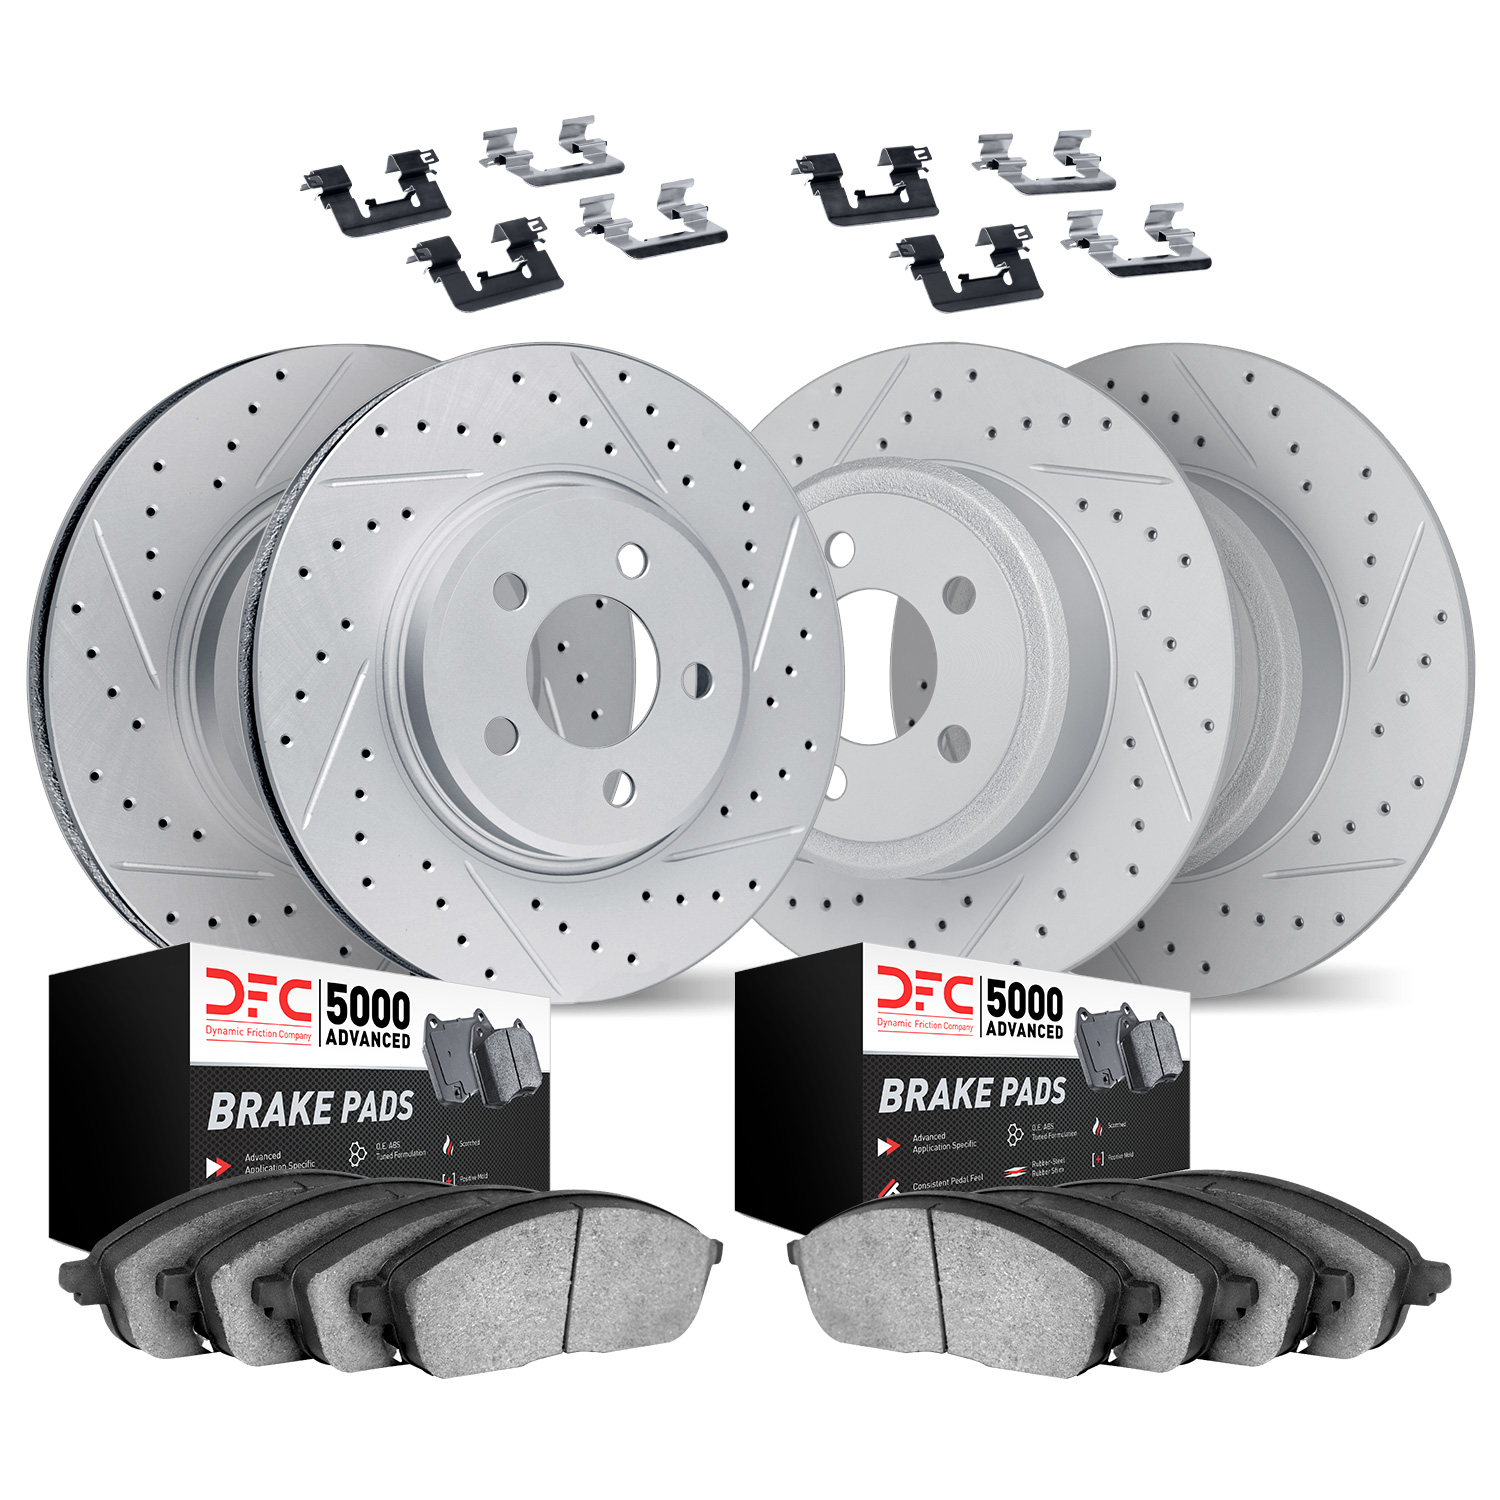 2514-13012 Geoperformance Drilled/Slotted Rotors w/5000 Advanced Brake Pads Kit & Hardware, Fits Select Subaru, Position: Front